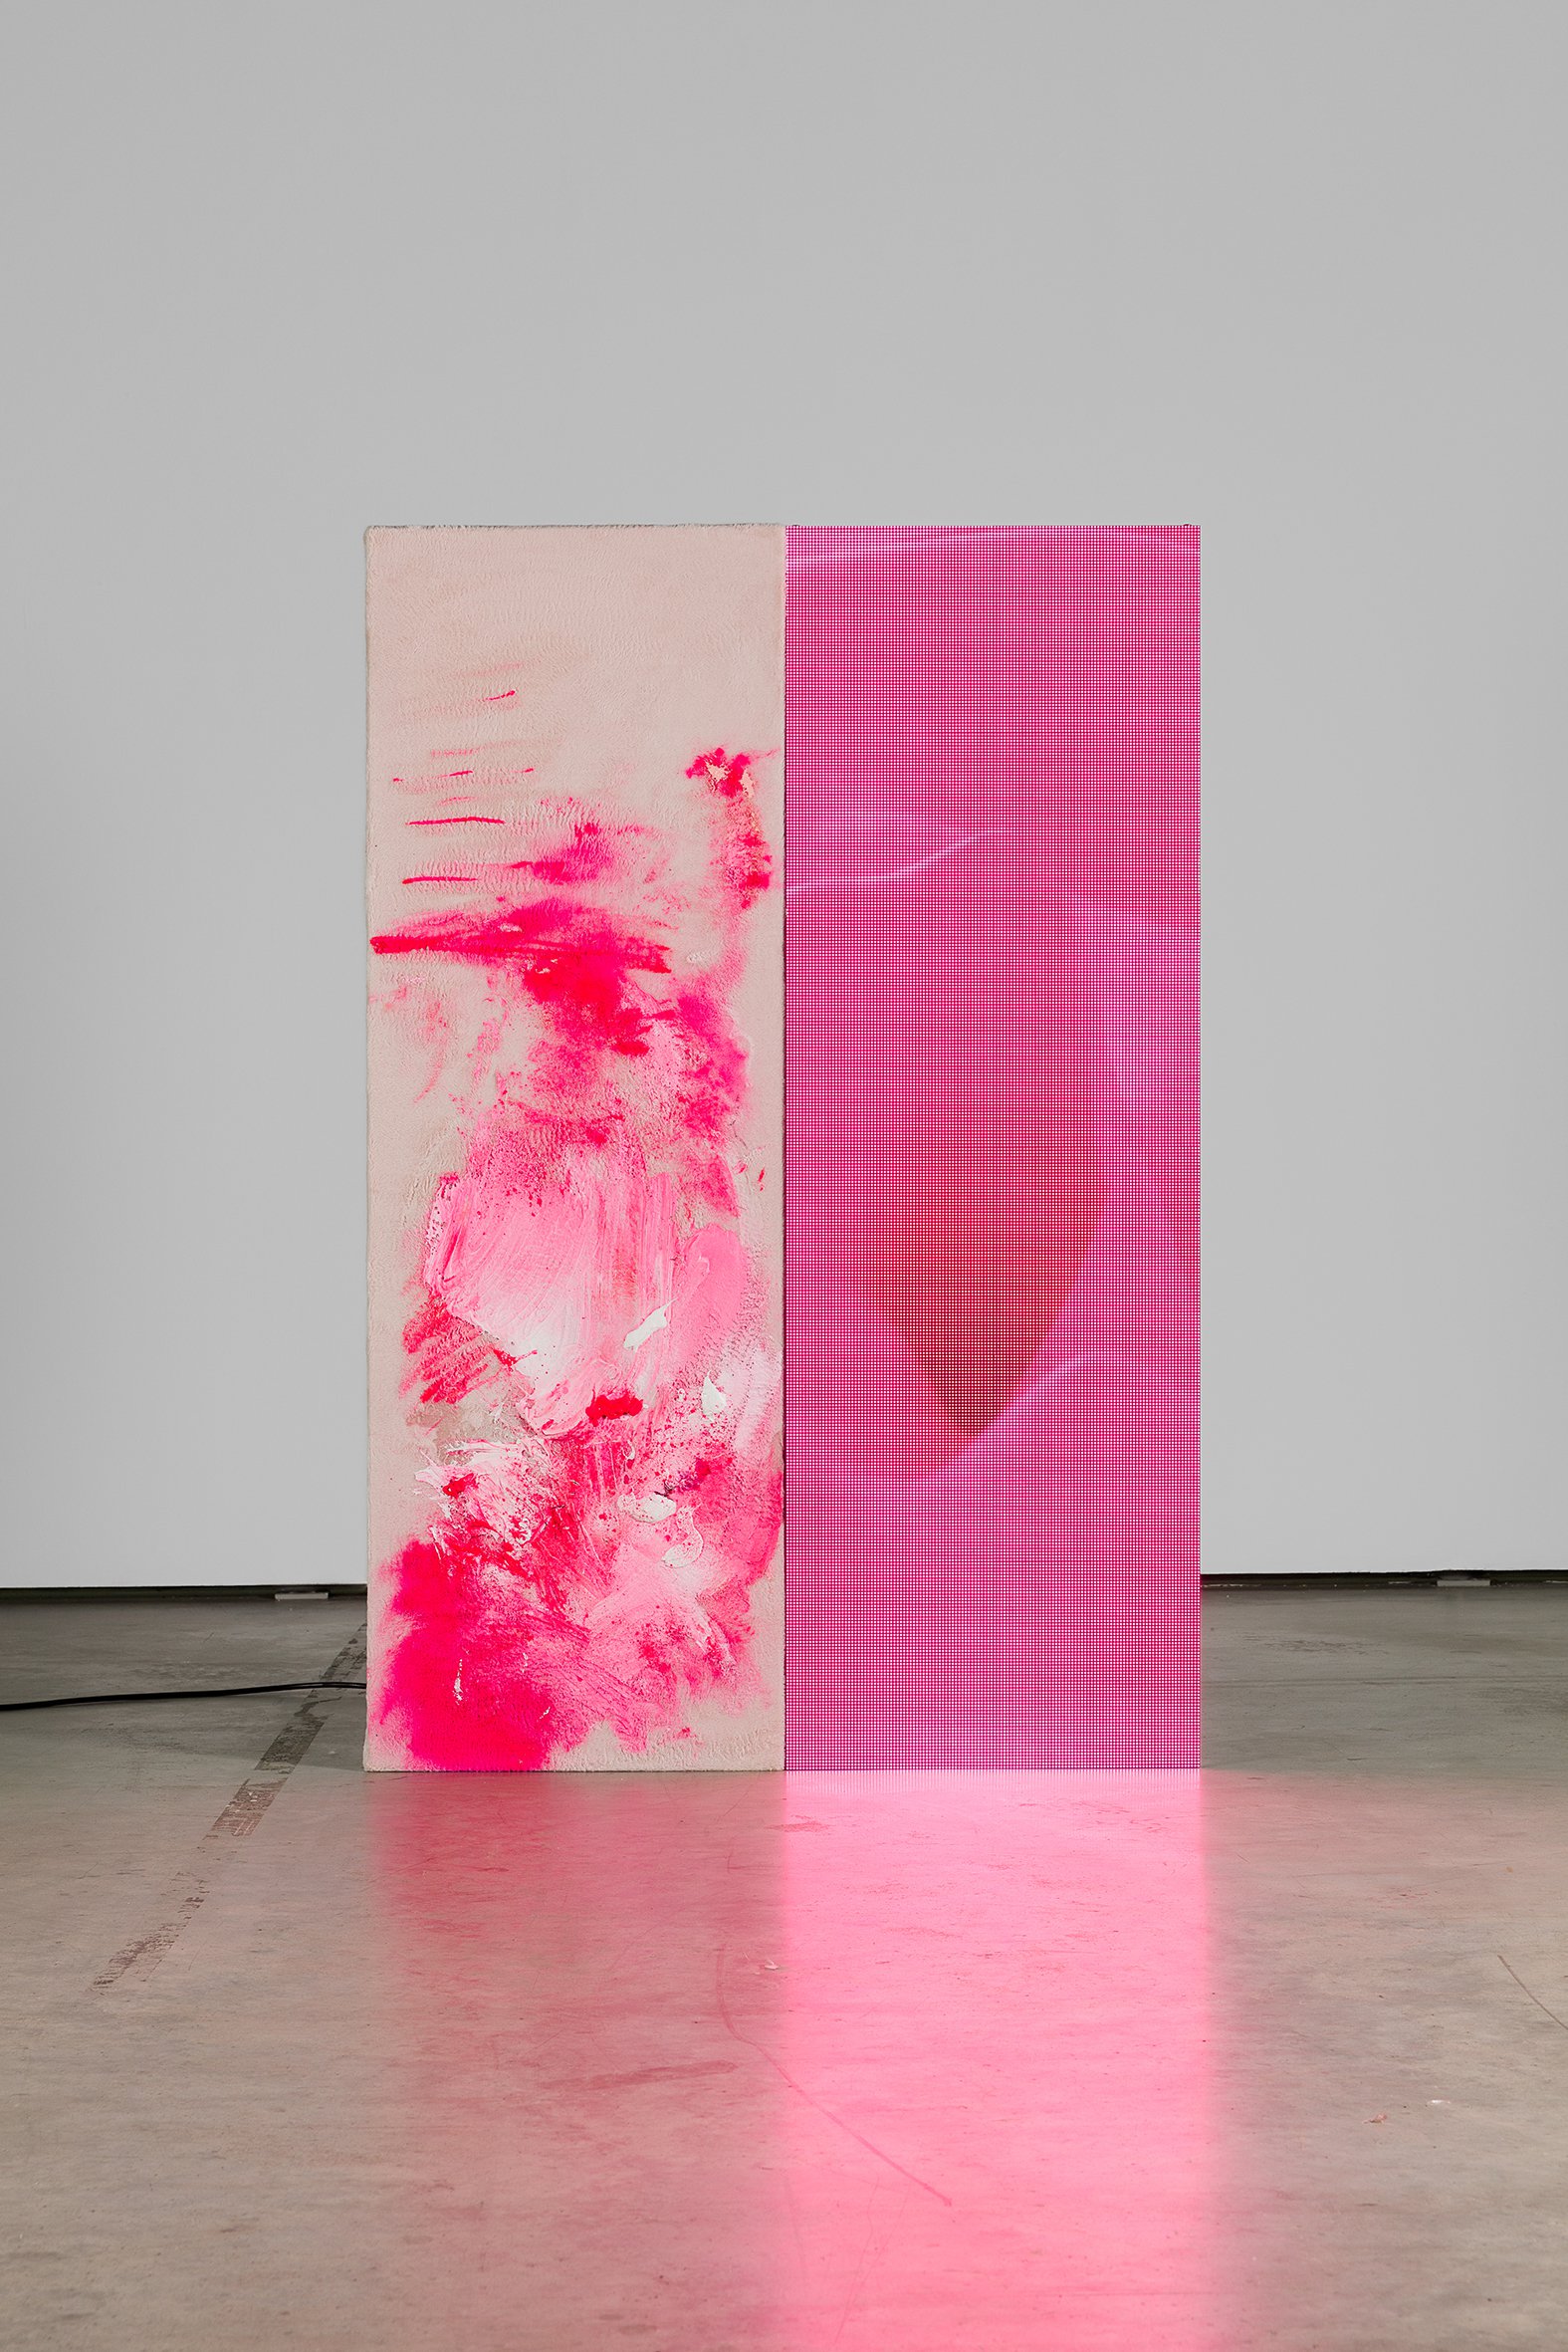 Philipp TimischlHard workers (Pink &amp; Pink), 2021Mixed Media on fake fur, LED Panels, metal truss, media player, Video 3’39&#x27;&#x27;150 x 100 x 50 cm